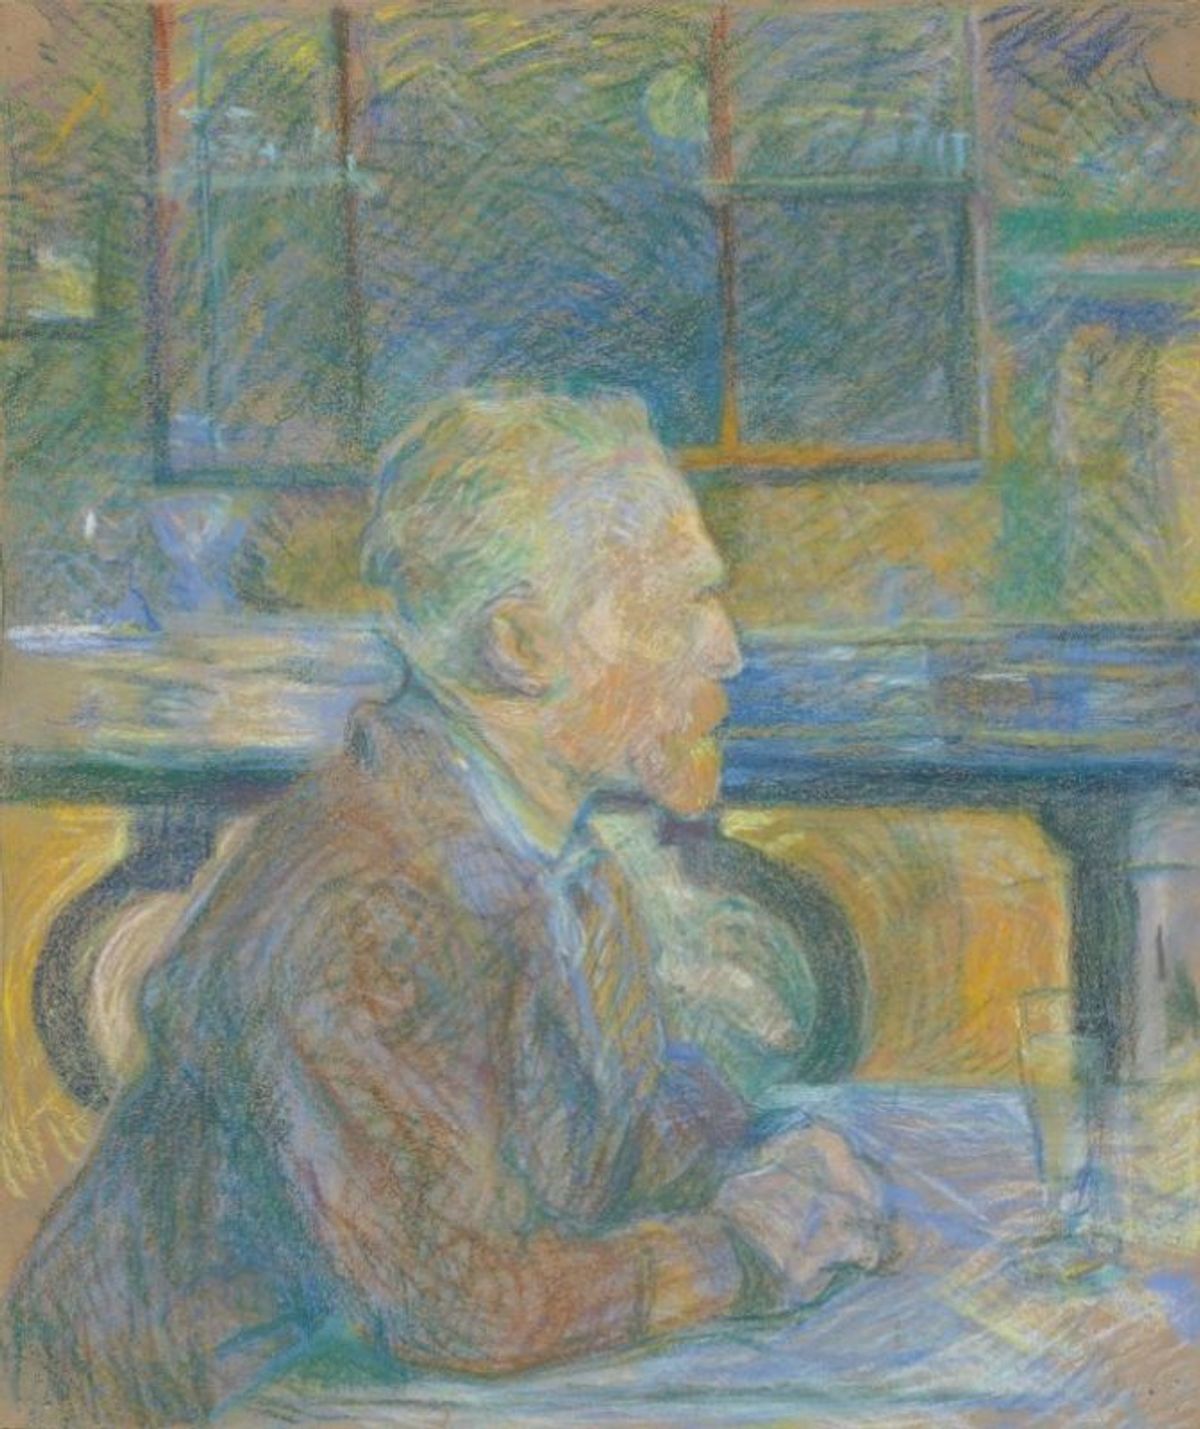 New Van Gogh self-portrait discovered hidden under another painting